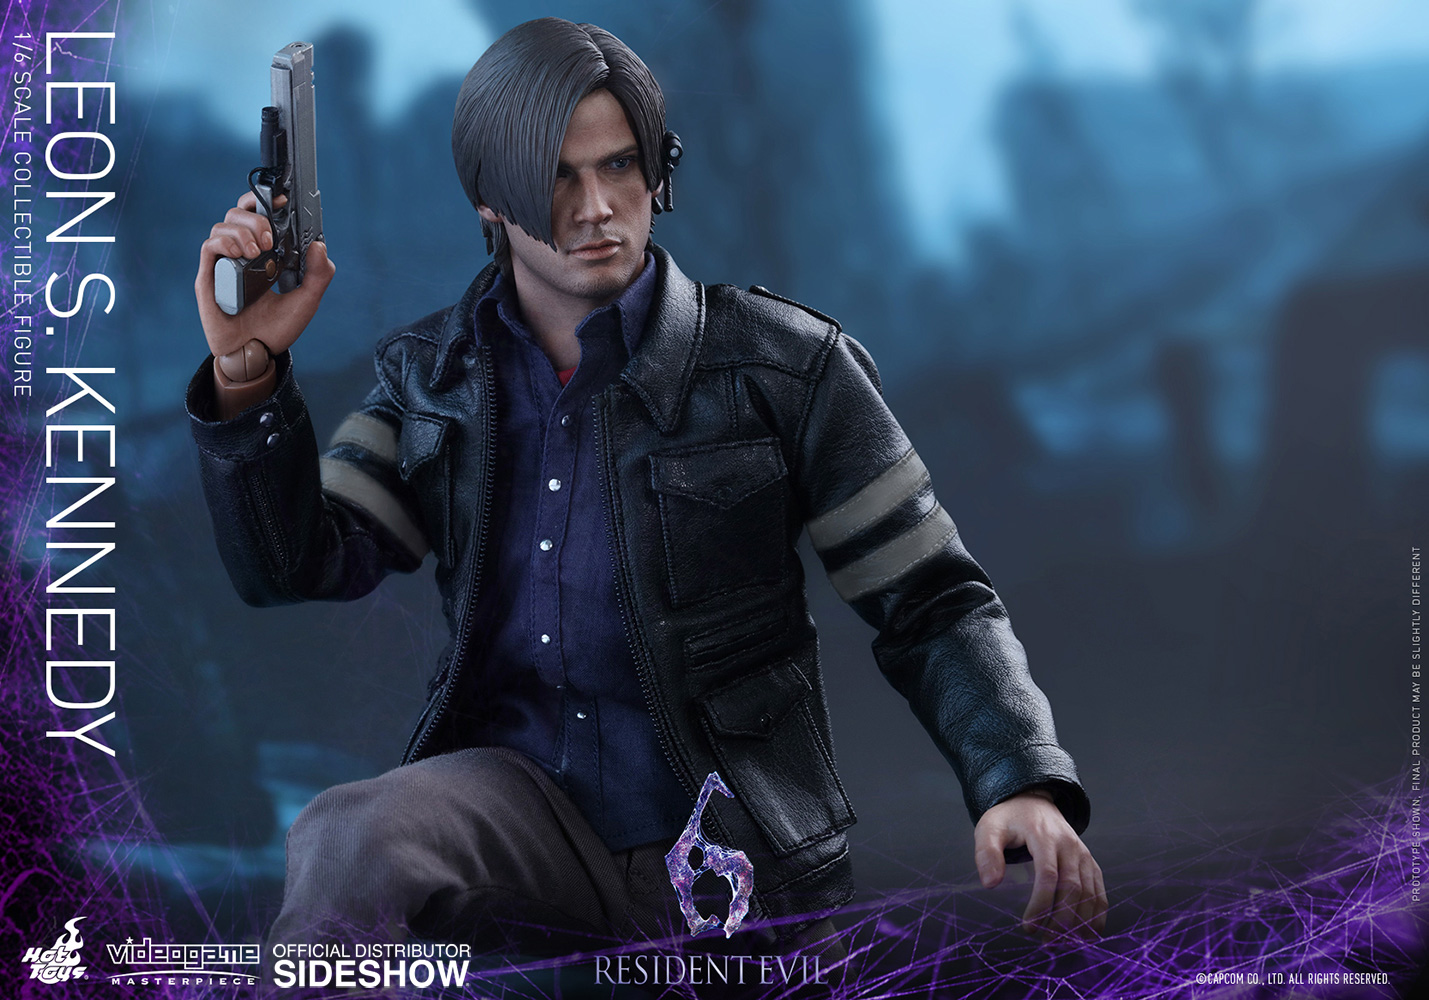 Resident Evil Leon S Kennedy Sixth Scale Figure By Hot Toys Sideshow Collectibles